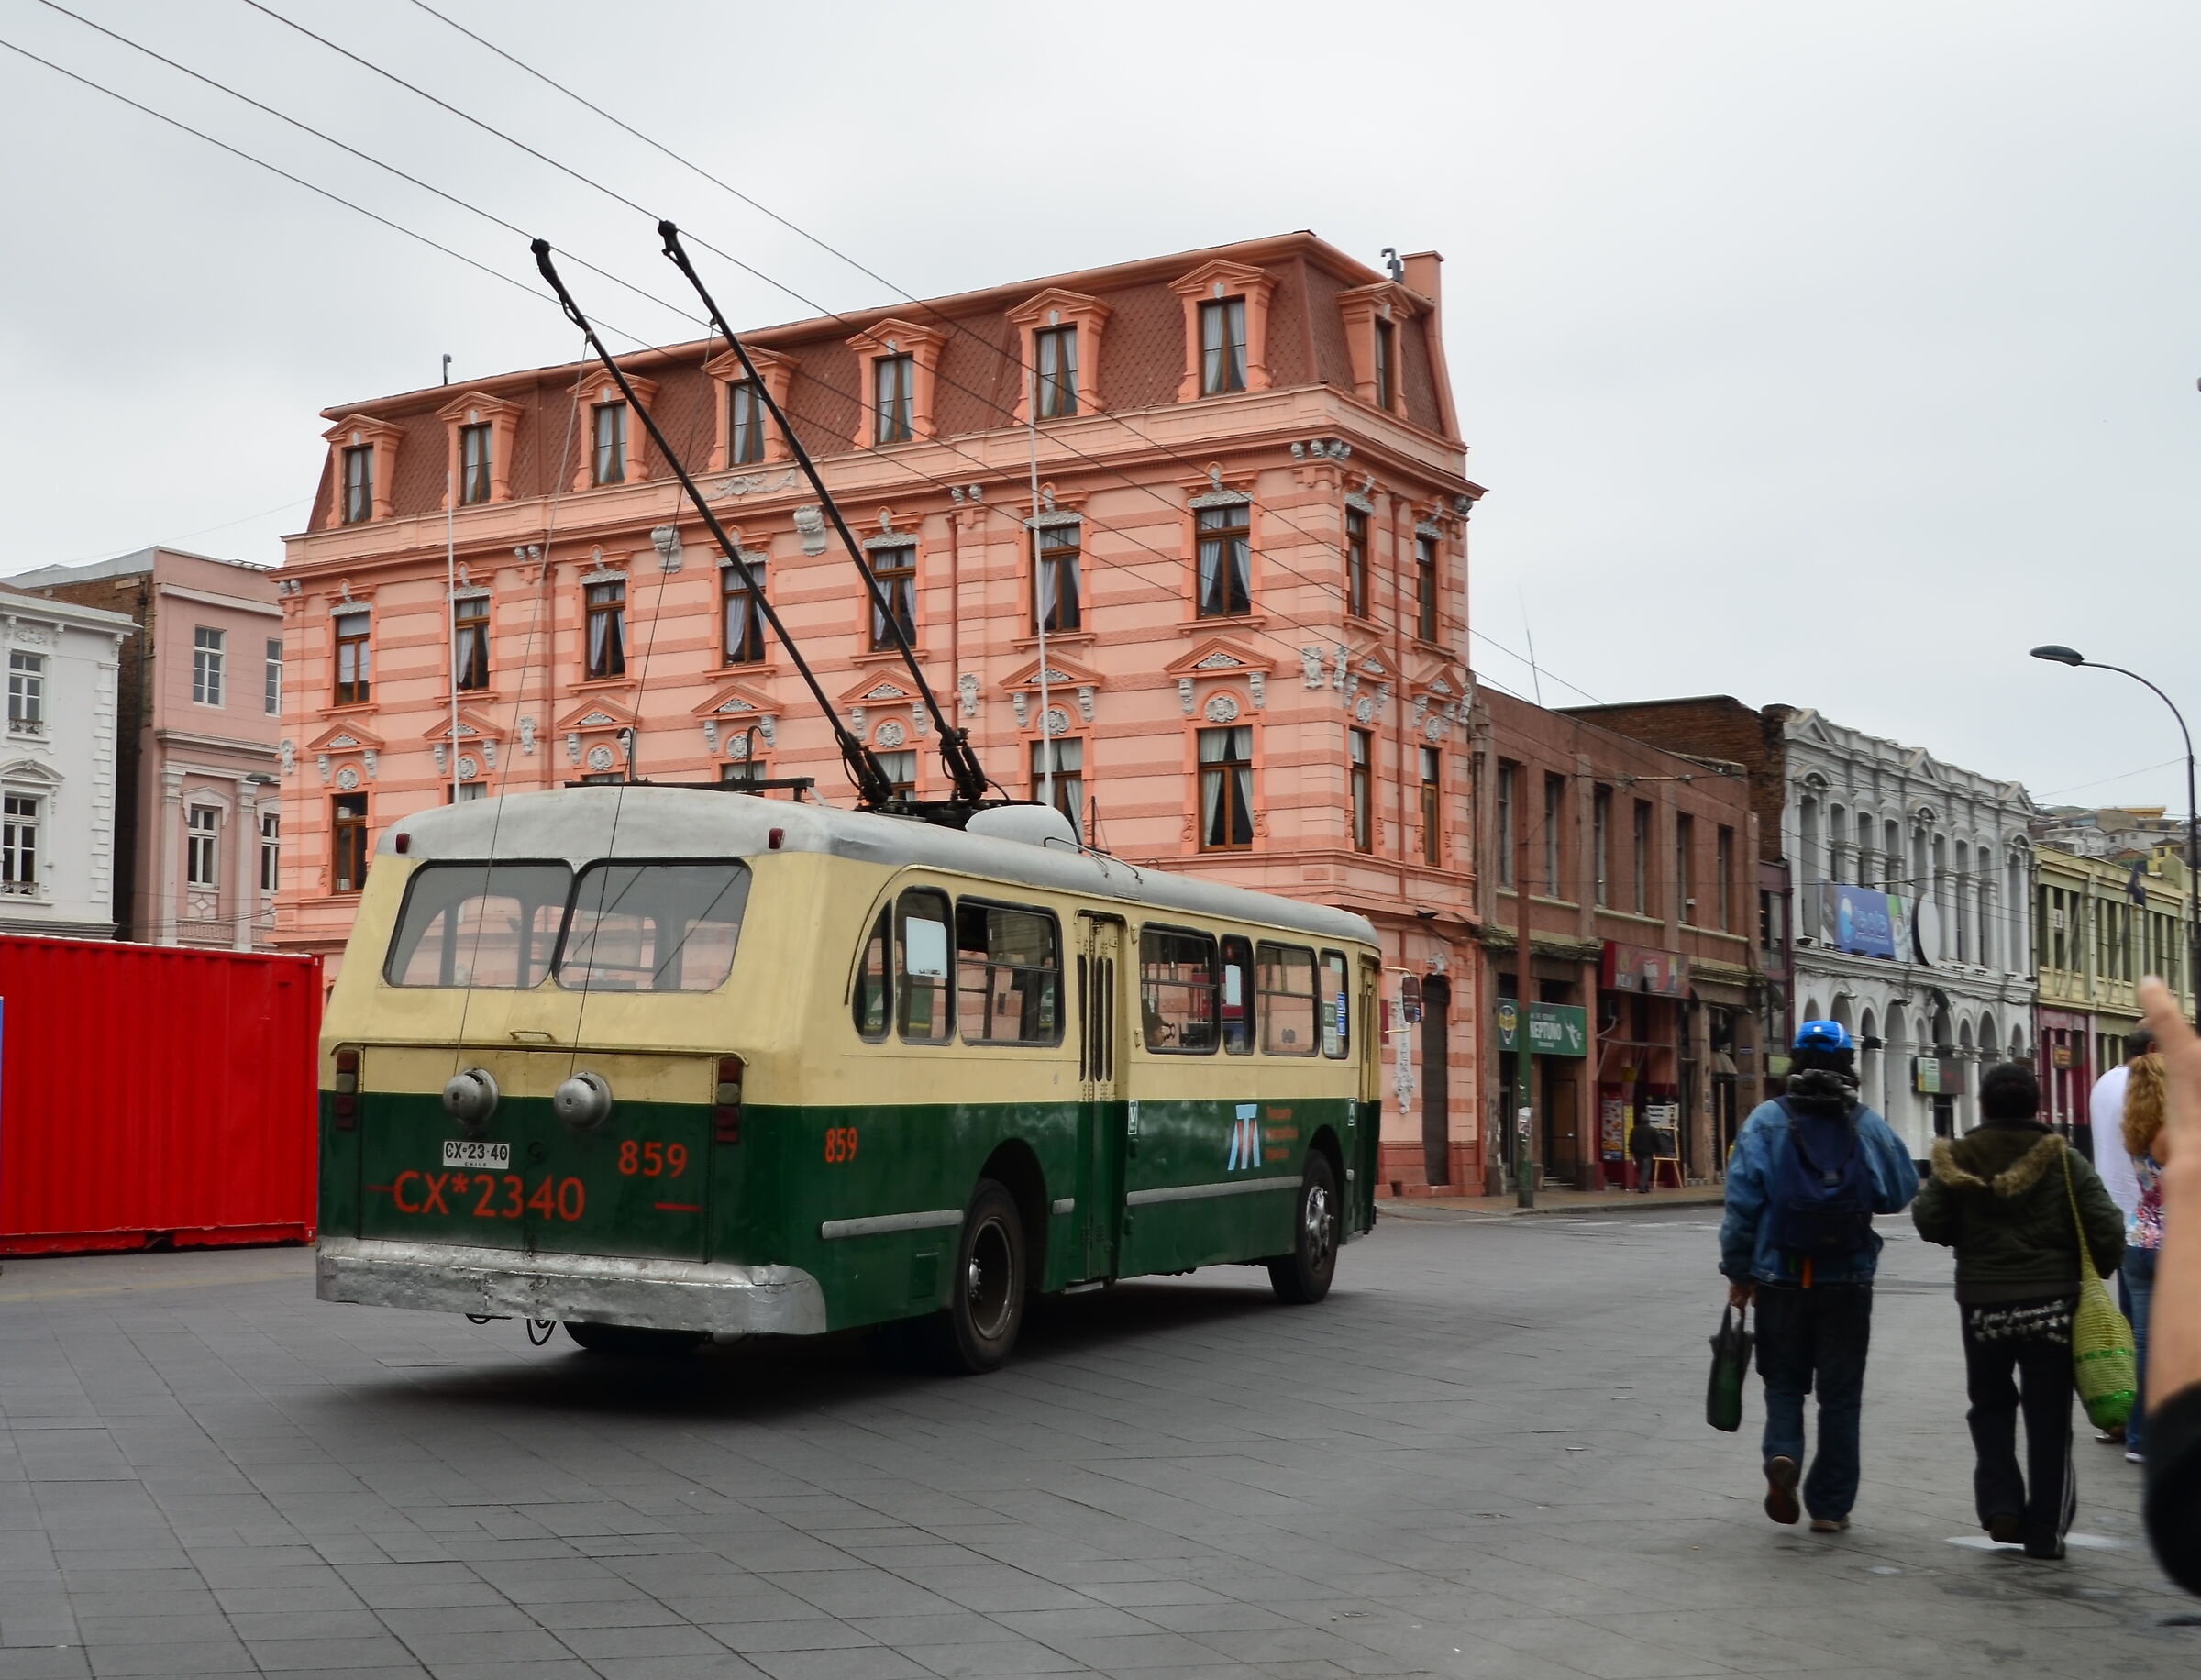 One of Valparaiso's historic trolleybuses...